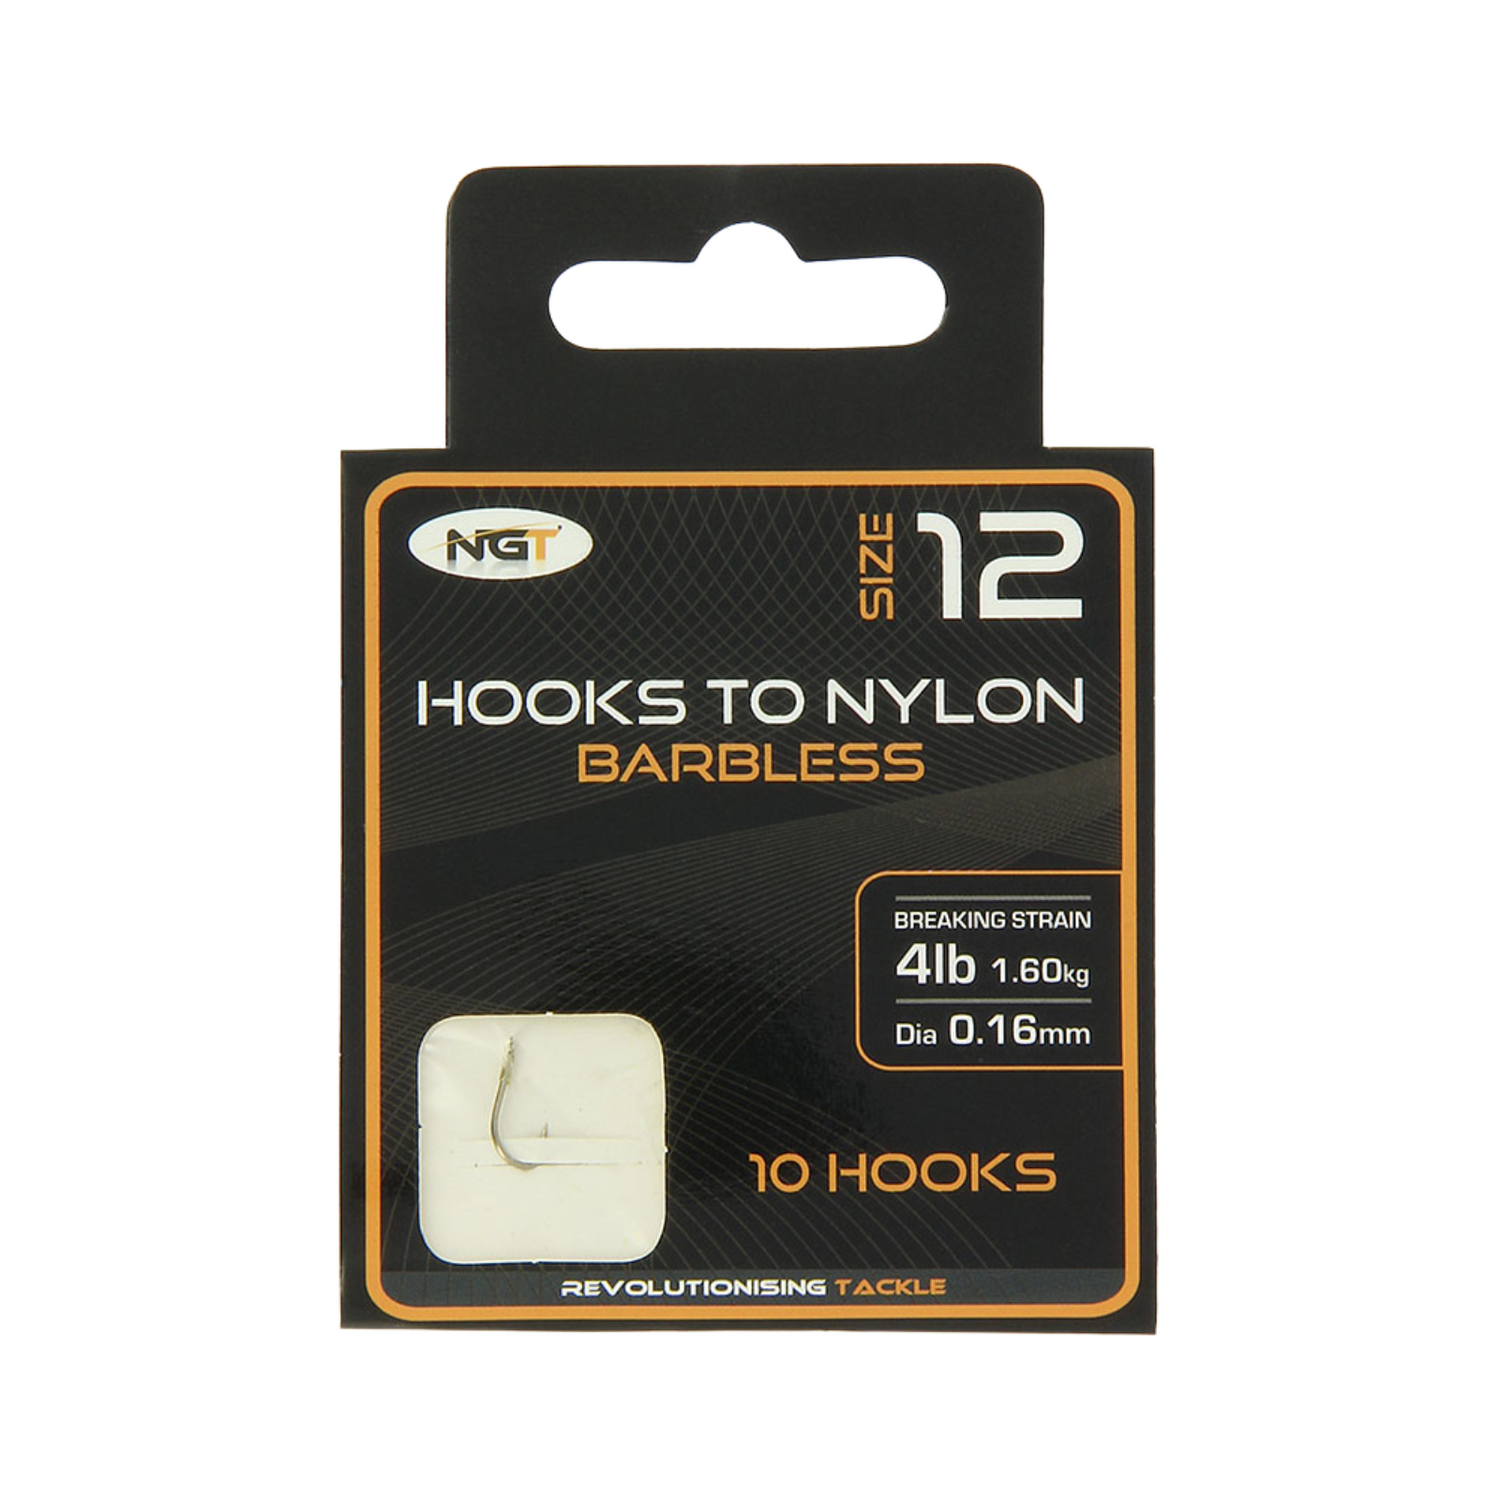 NGT BARBLESS HOOKS TO NYLON.